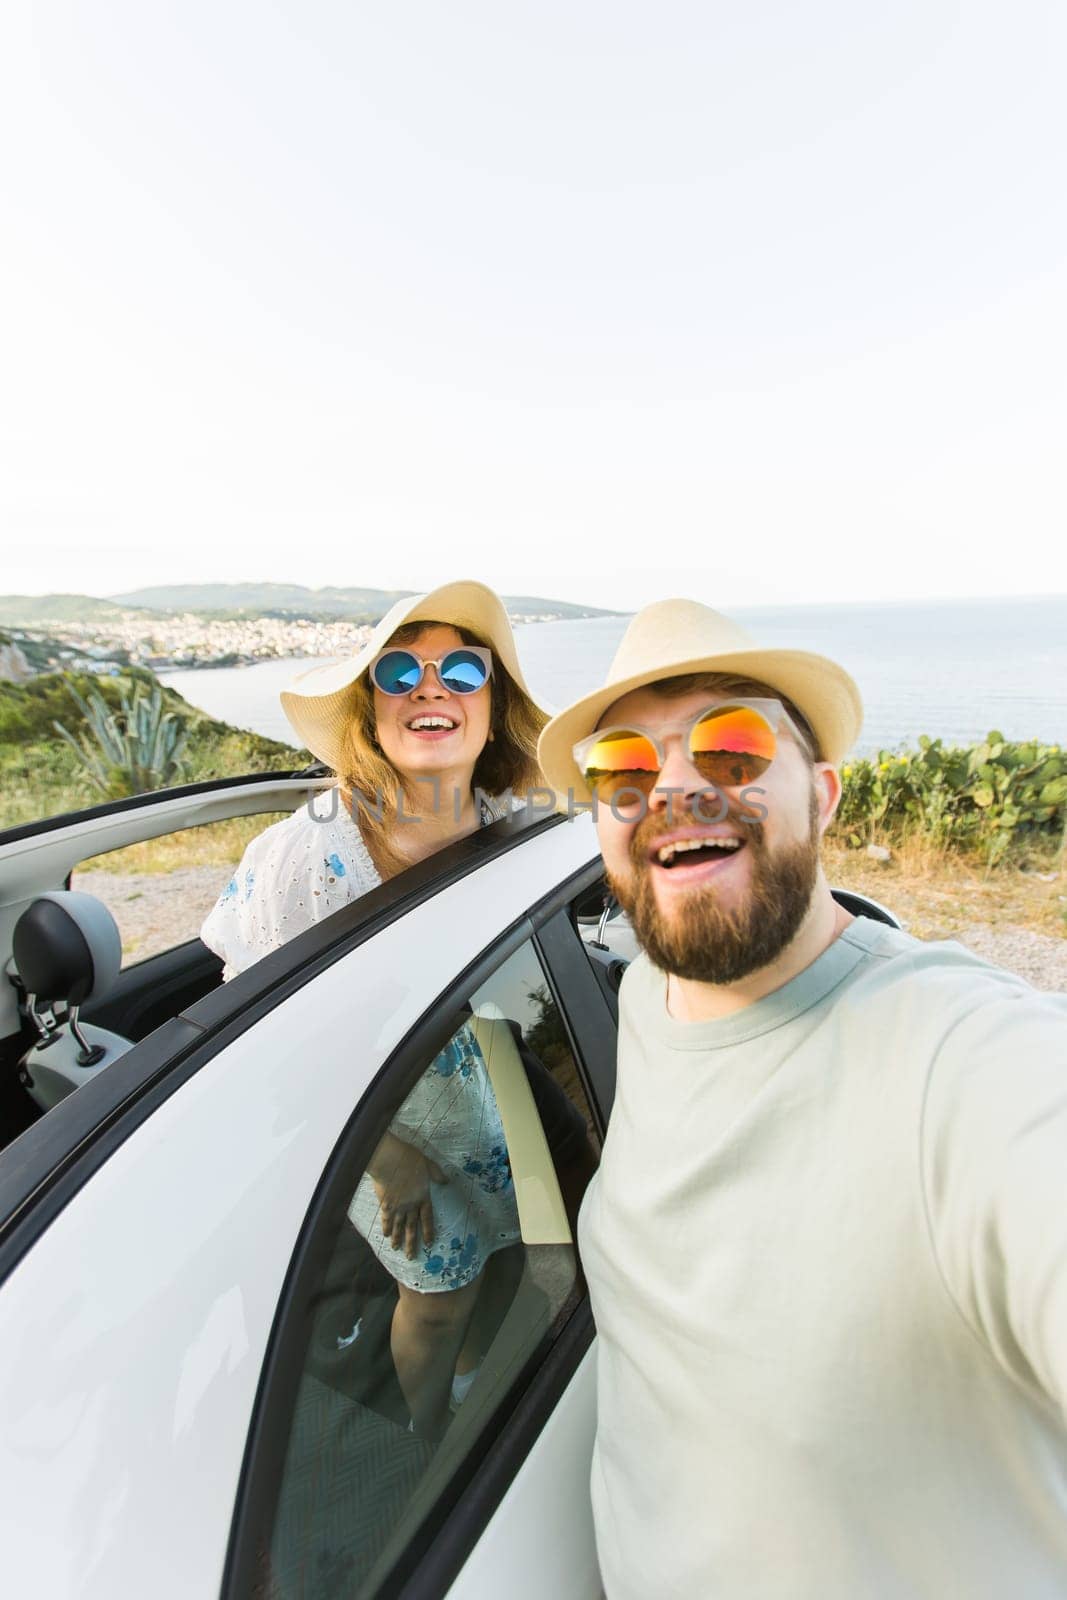 Romantic couple making selfie on smartphone camera in rental cabrio car on ocean or sea beach, enjoying summer vacation together and taking picture cellular resting near sea on weekends